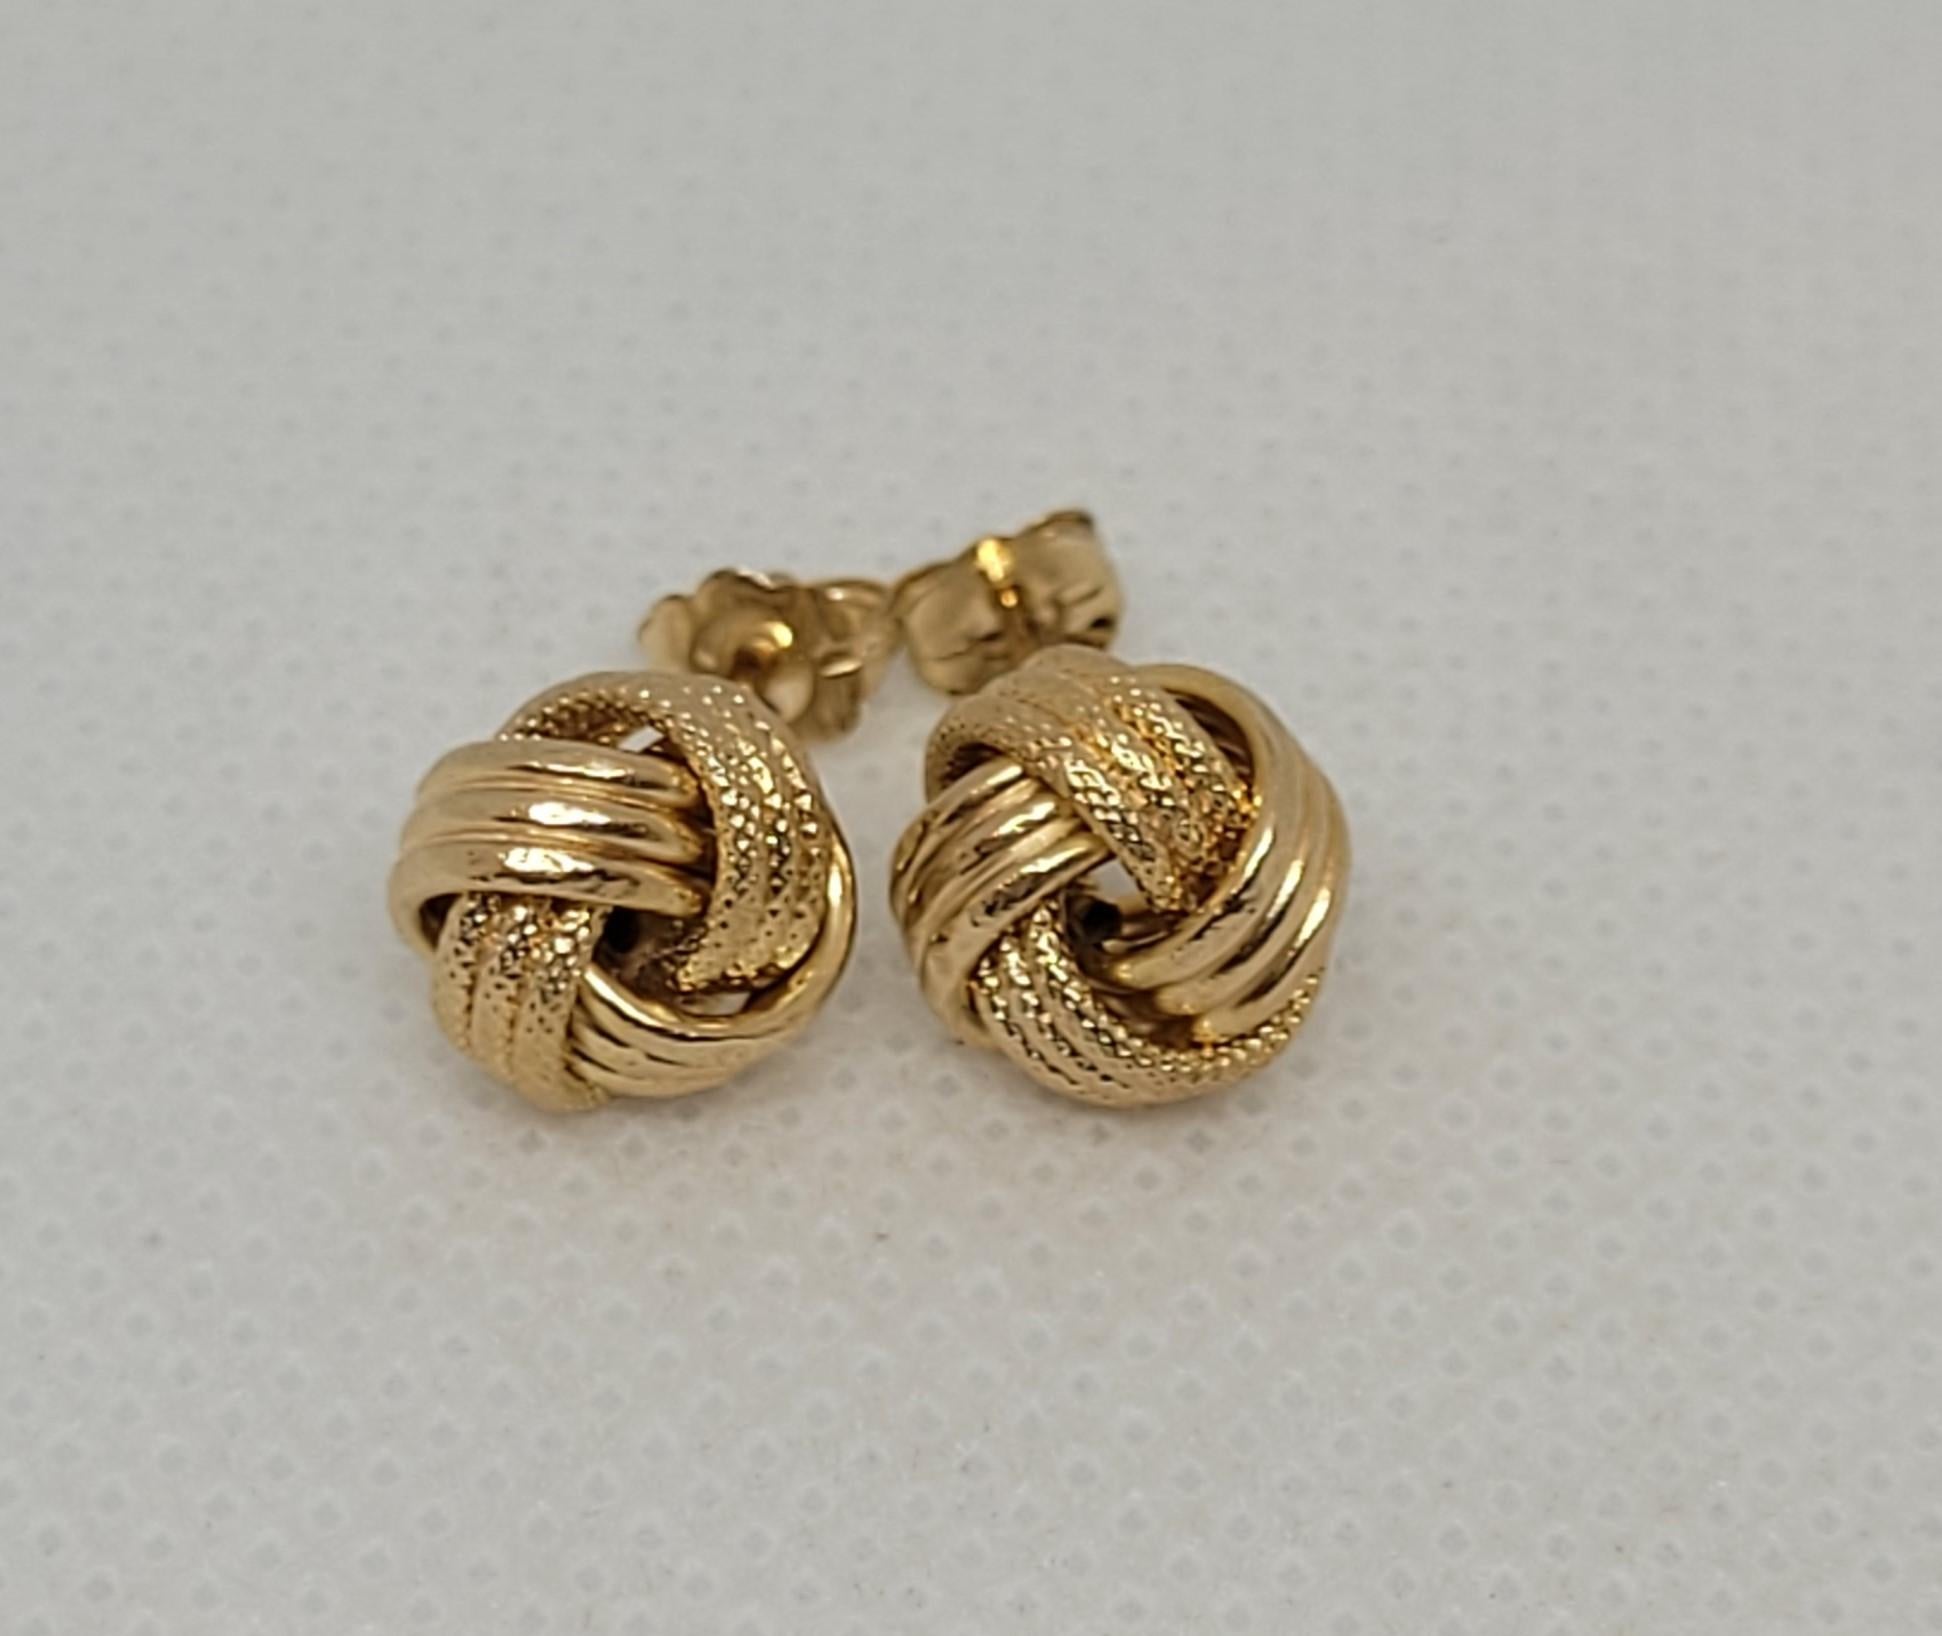 Lovely 14kt Yellow Gold Knot Earrings, Friction Post with Push-On Backings, .7 Grams hollow, Stamped 14kt Italy RL. These are great versatile earrings.  Overall, these earrings are in very good condition. Please let me know us to know if you have